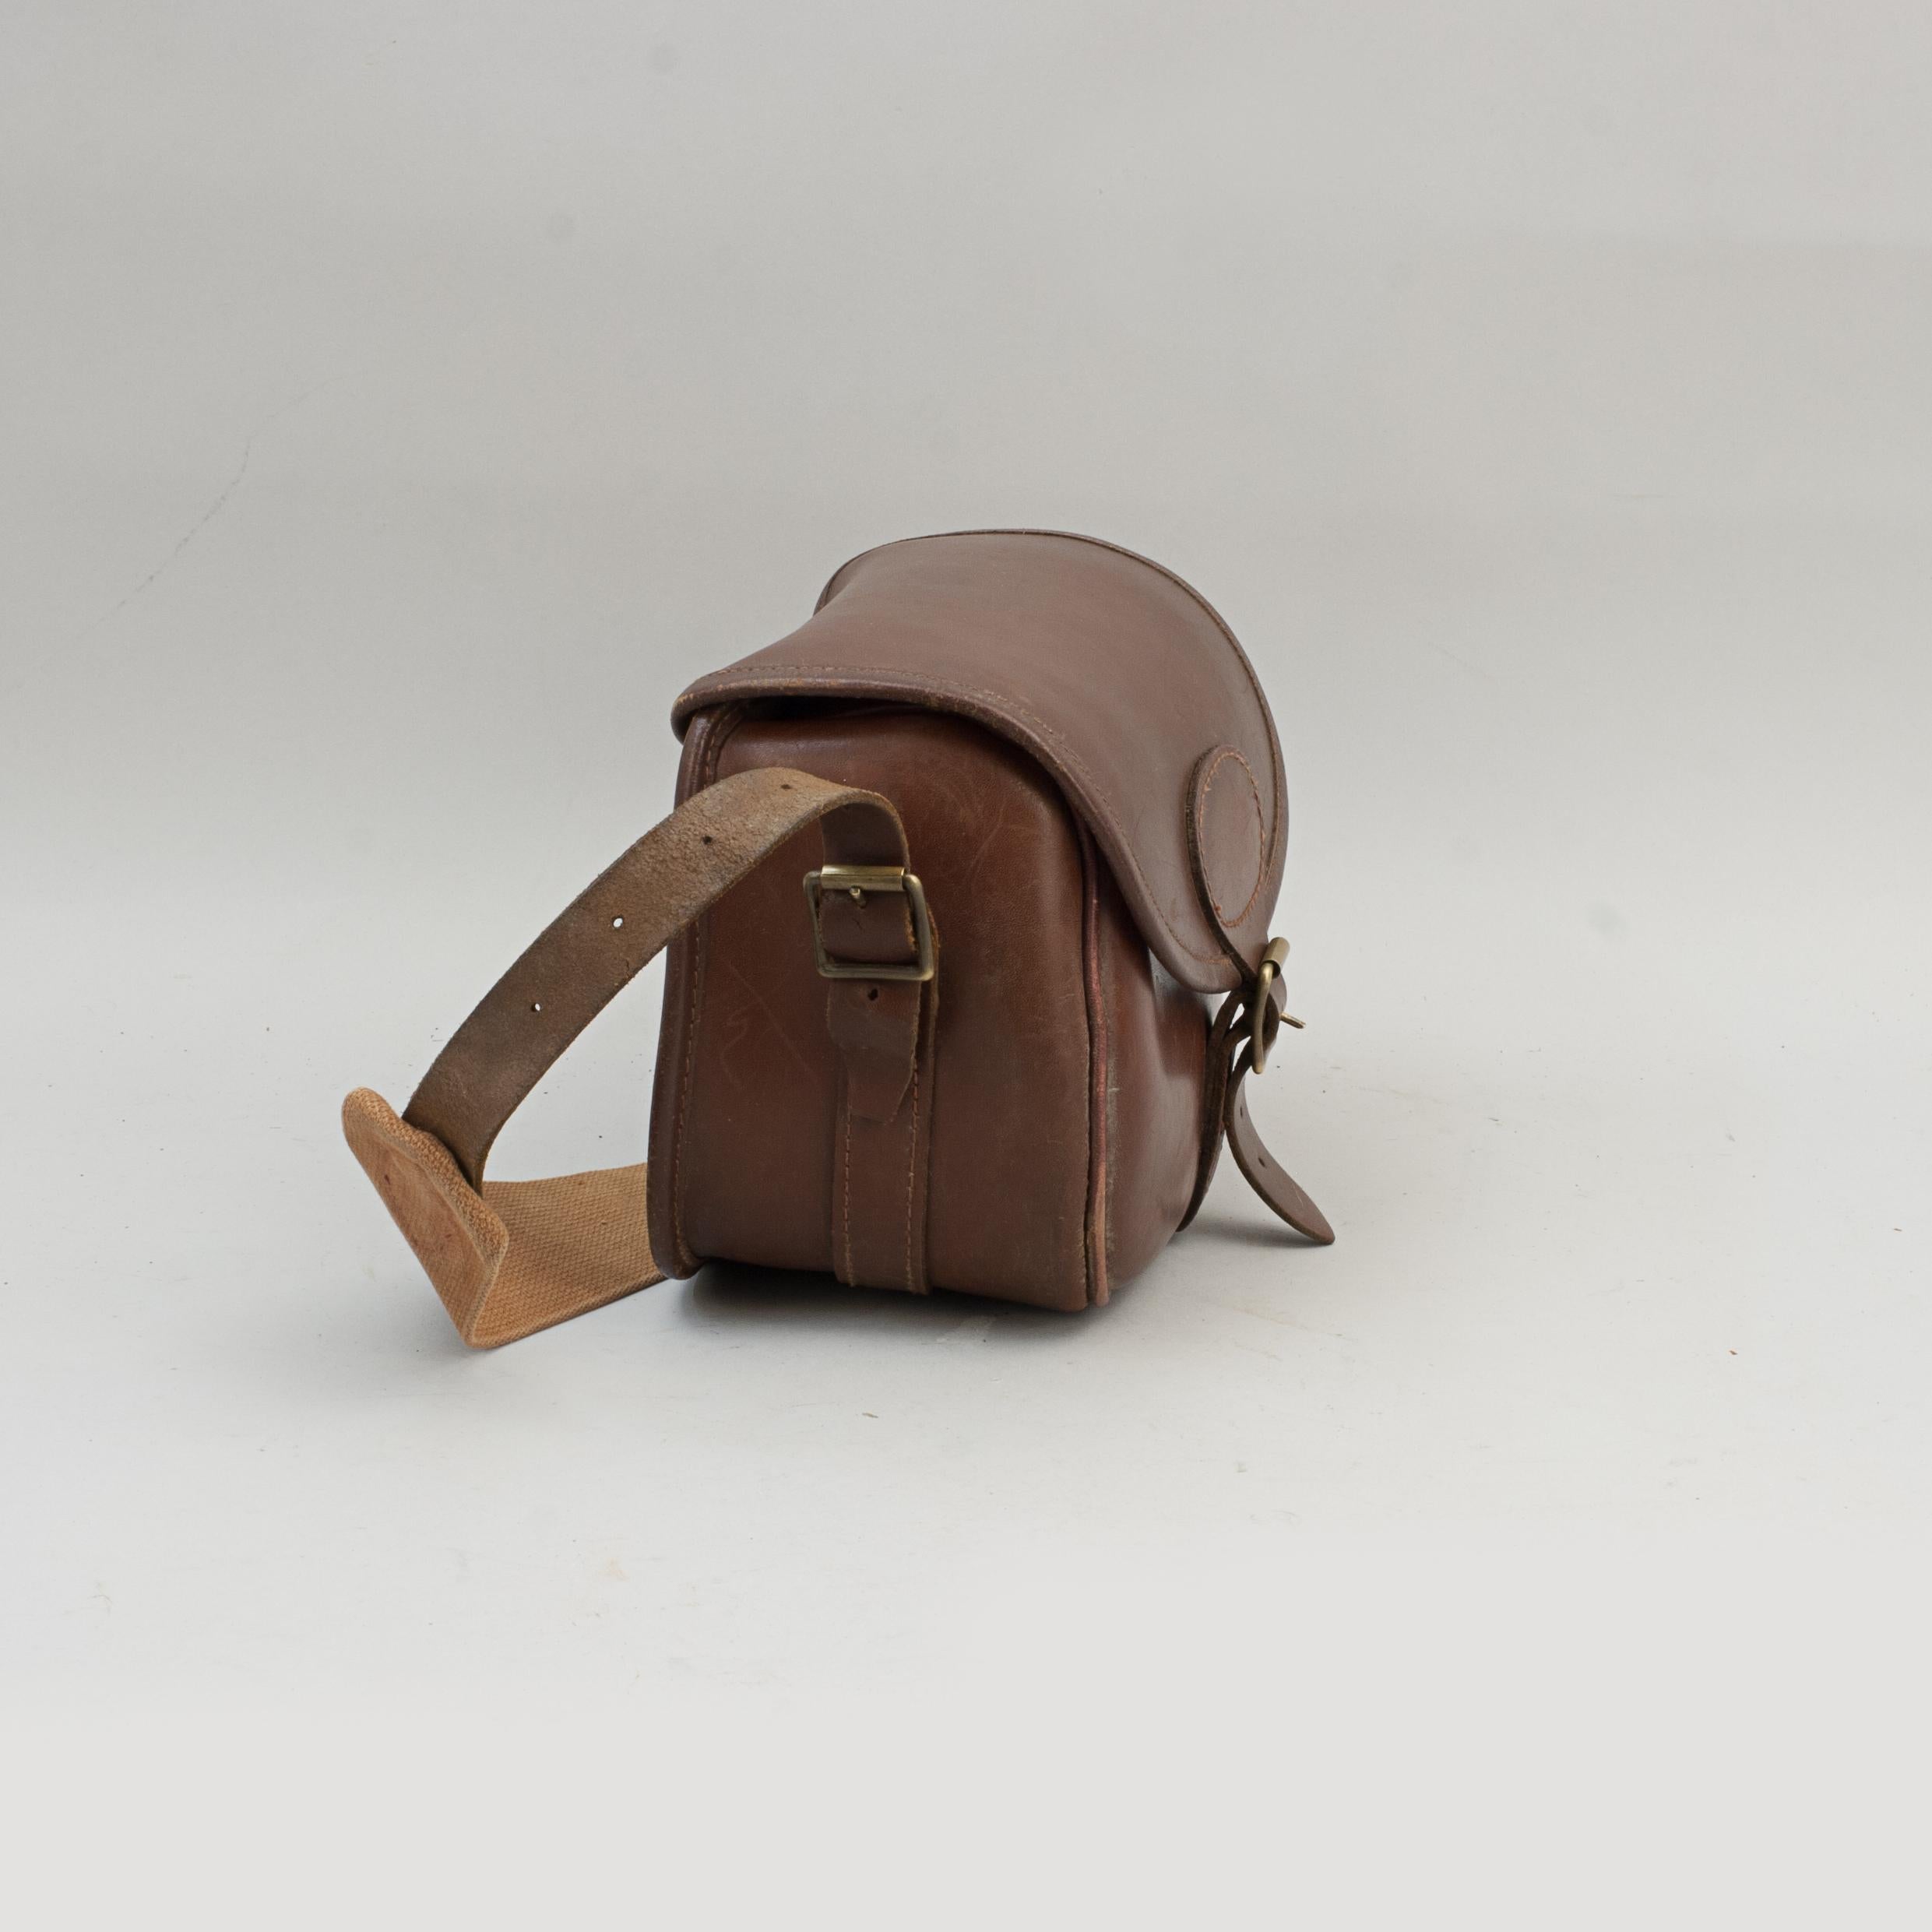 Vintage leather cartridge bag.
A good quality stiff leather cartridge bag. The bag is in good usable condition with brass fittings and an adjustable cotton web shoulder strap. A nice leather cartridge bag with no old owners initials. Maker